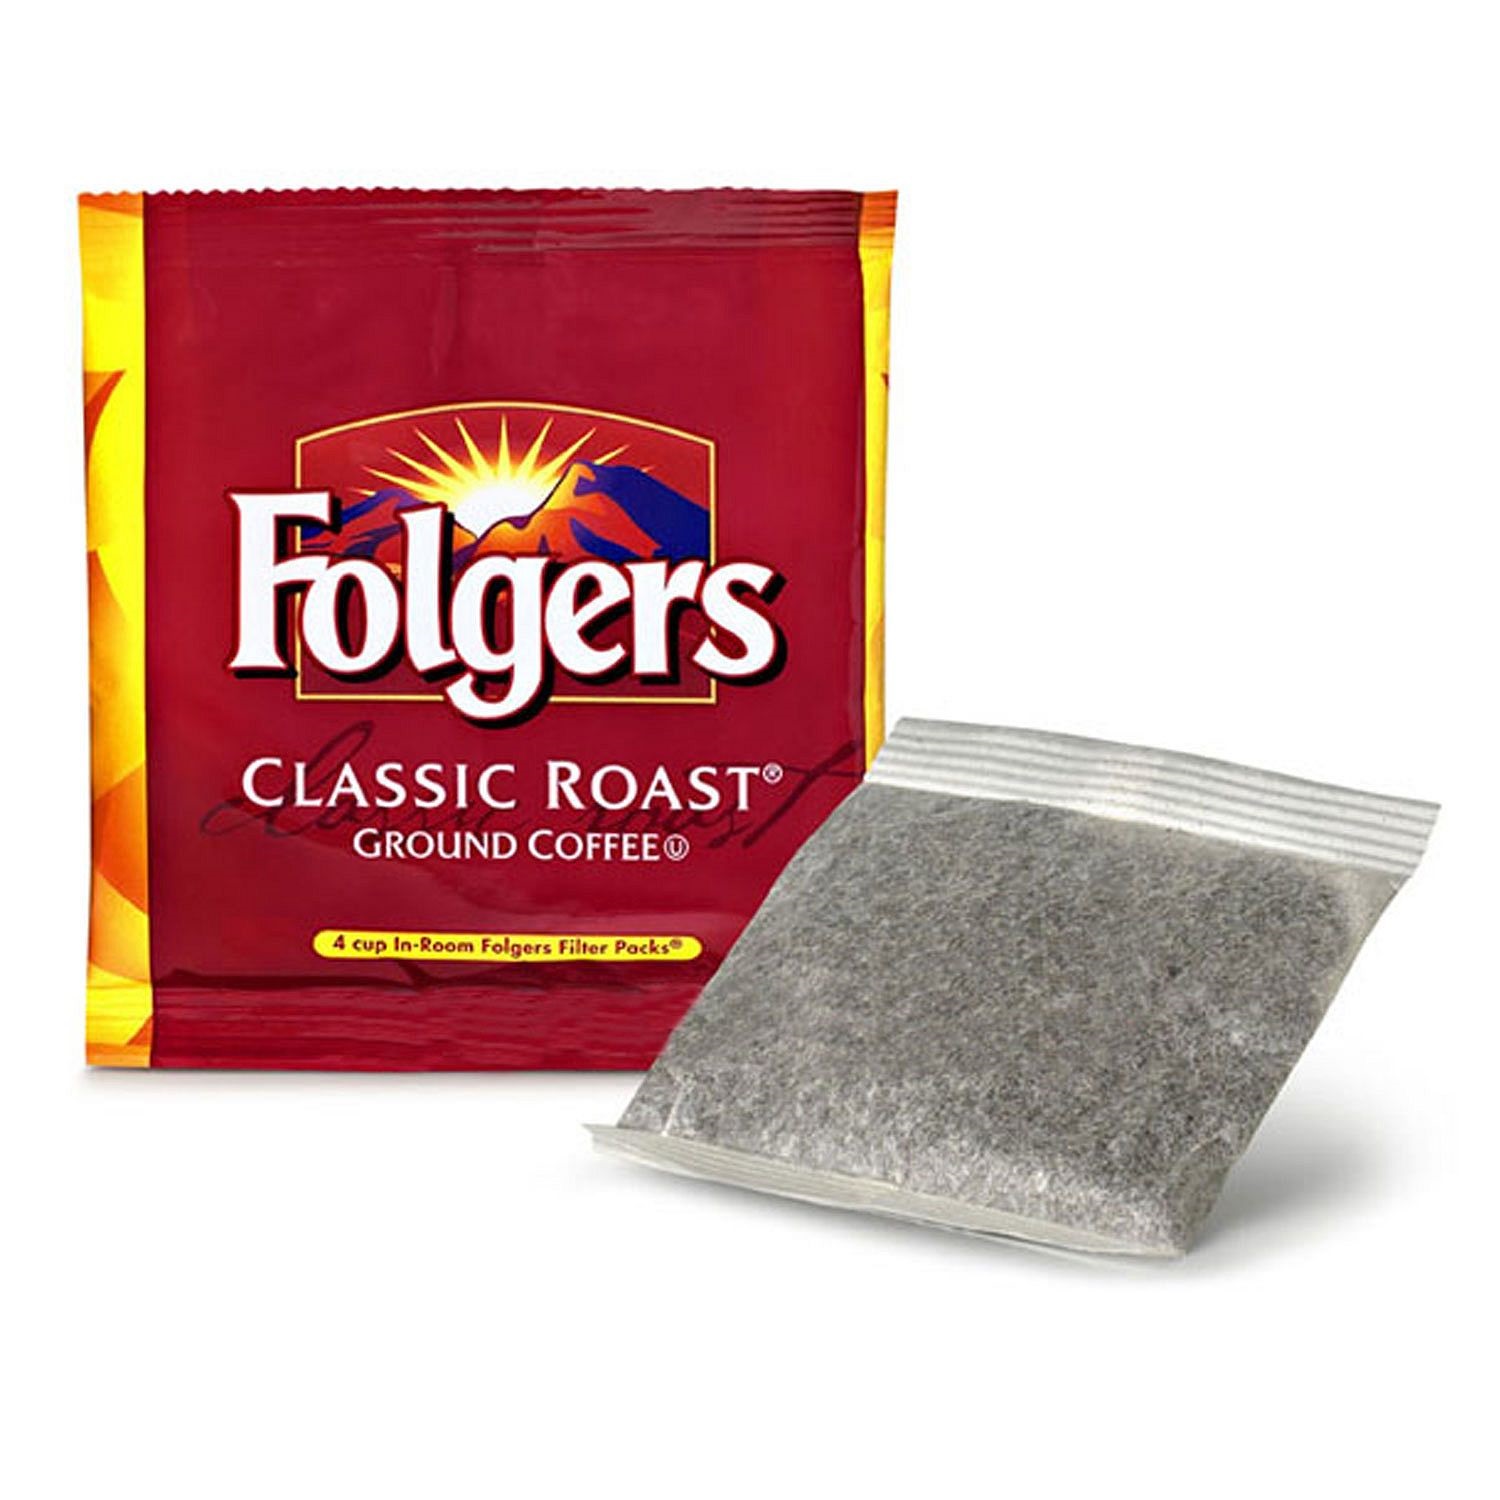 Folgers 4 Cup Hotel Classic Roast Coffee, Filter Packs (200 ct.)